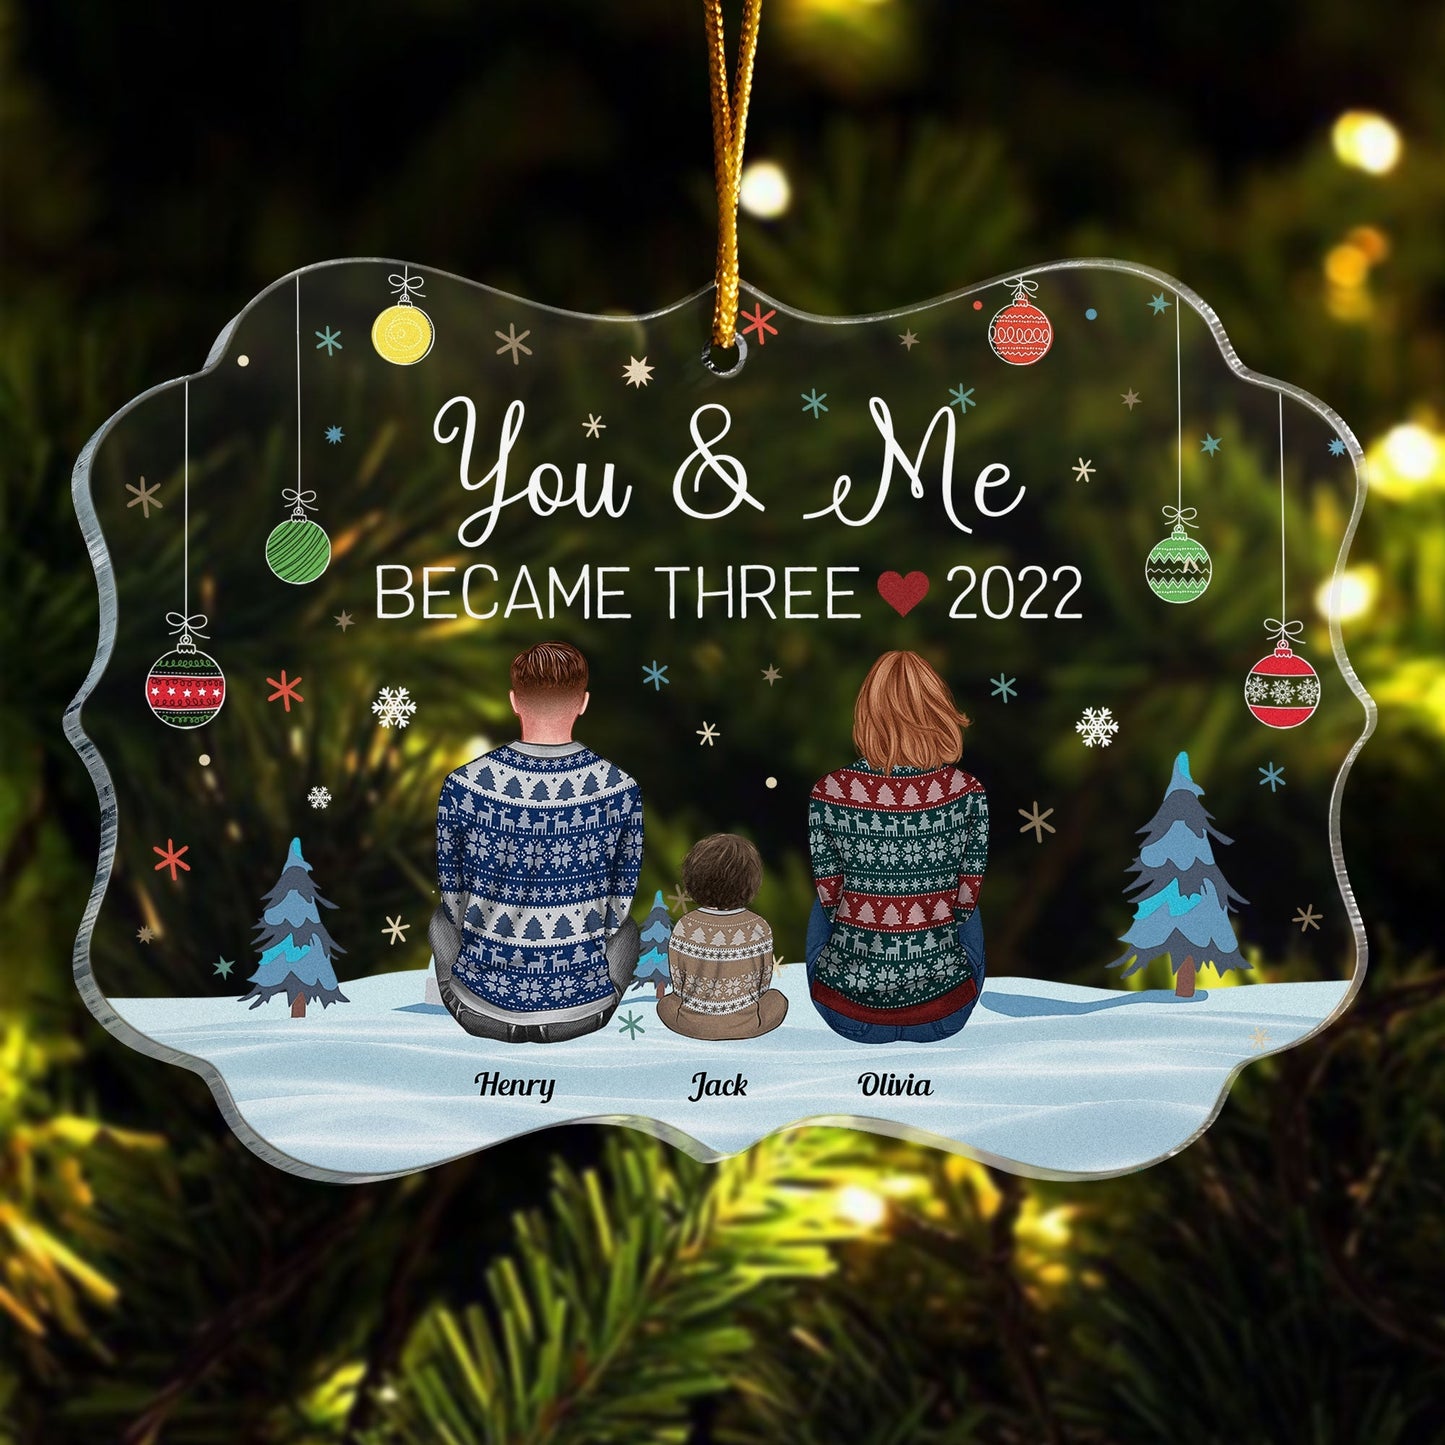 Growing Family, New Baby - Personalized Acrylic Ornament - Christmas, Loving Gift For Family Member, Mom, Dad